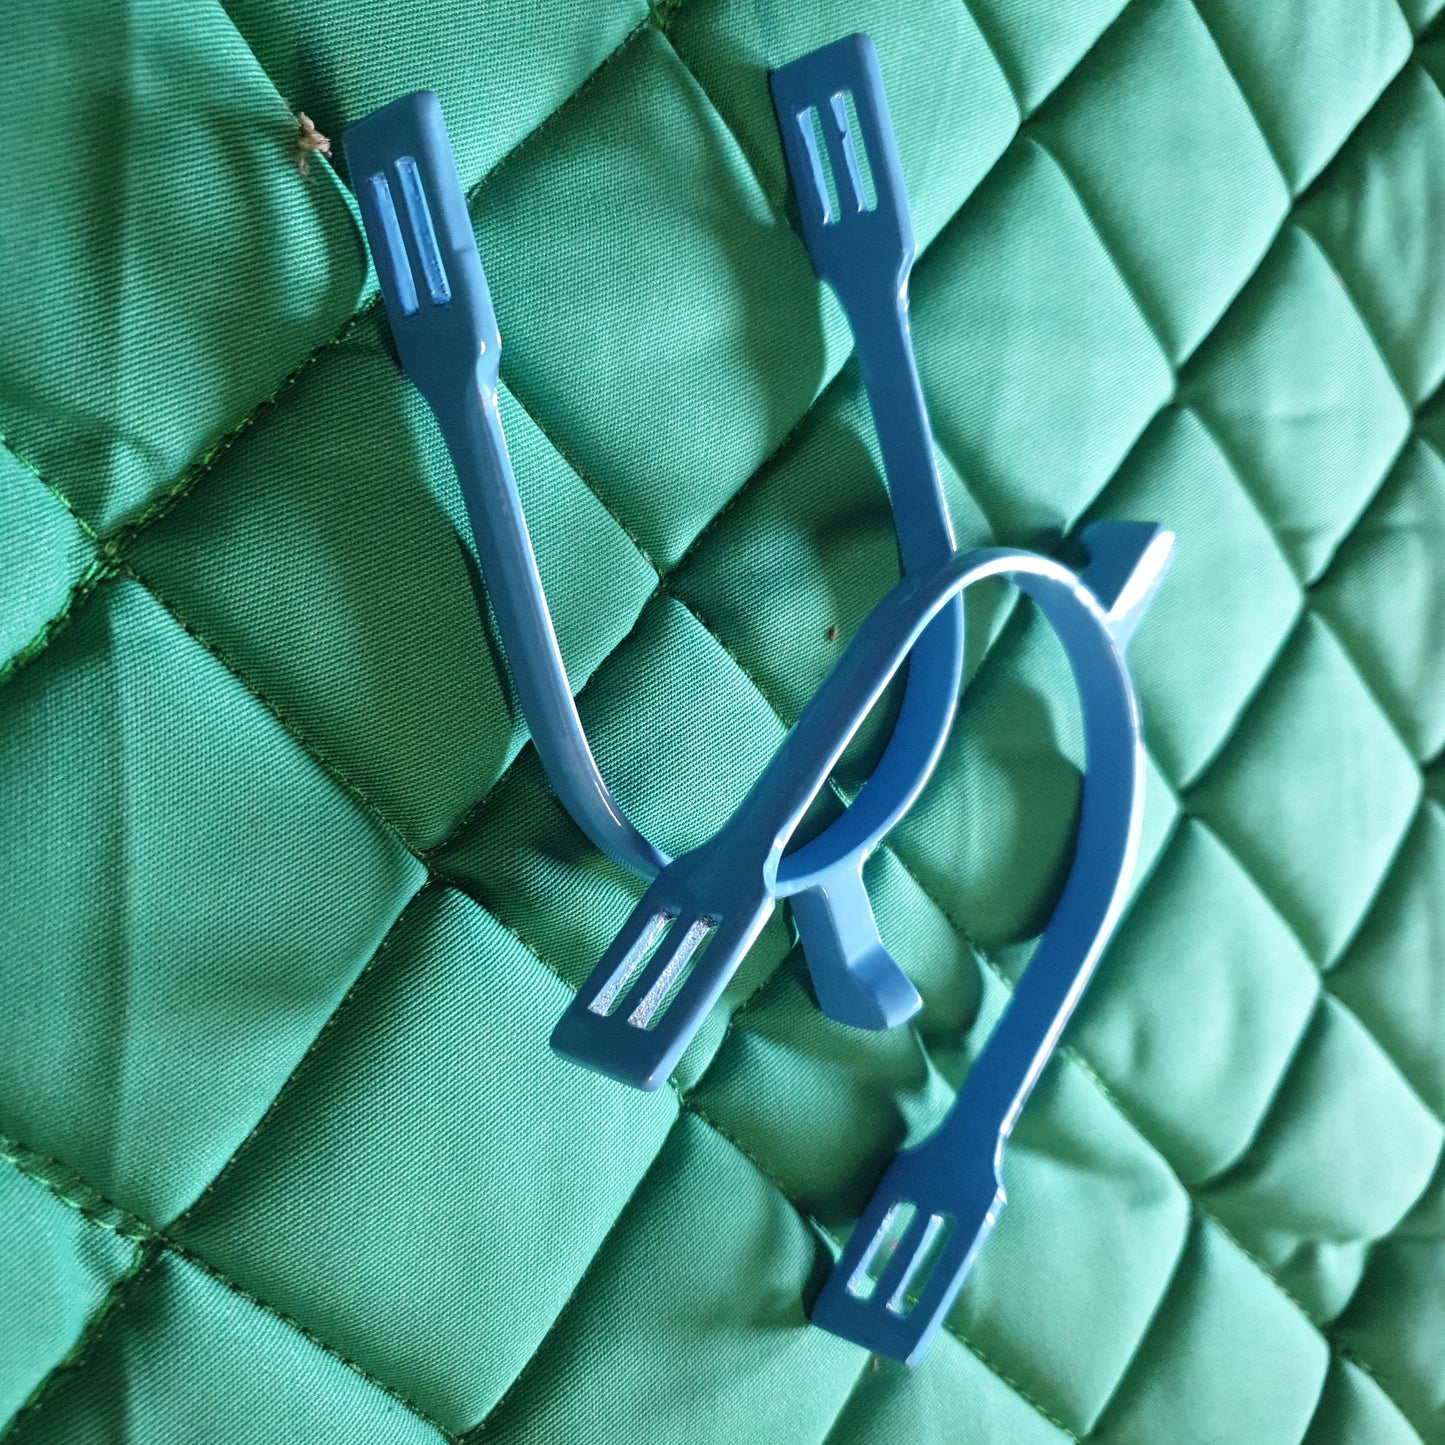 Day of the day CLEARANCE STOCK Coloured Spurs FREE POSTAGE